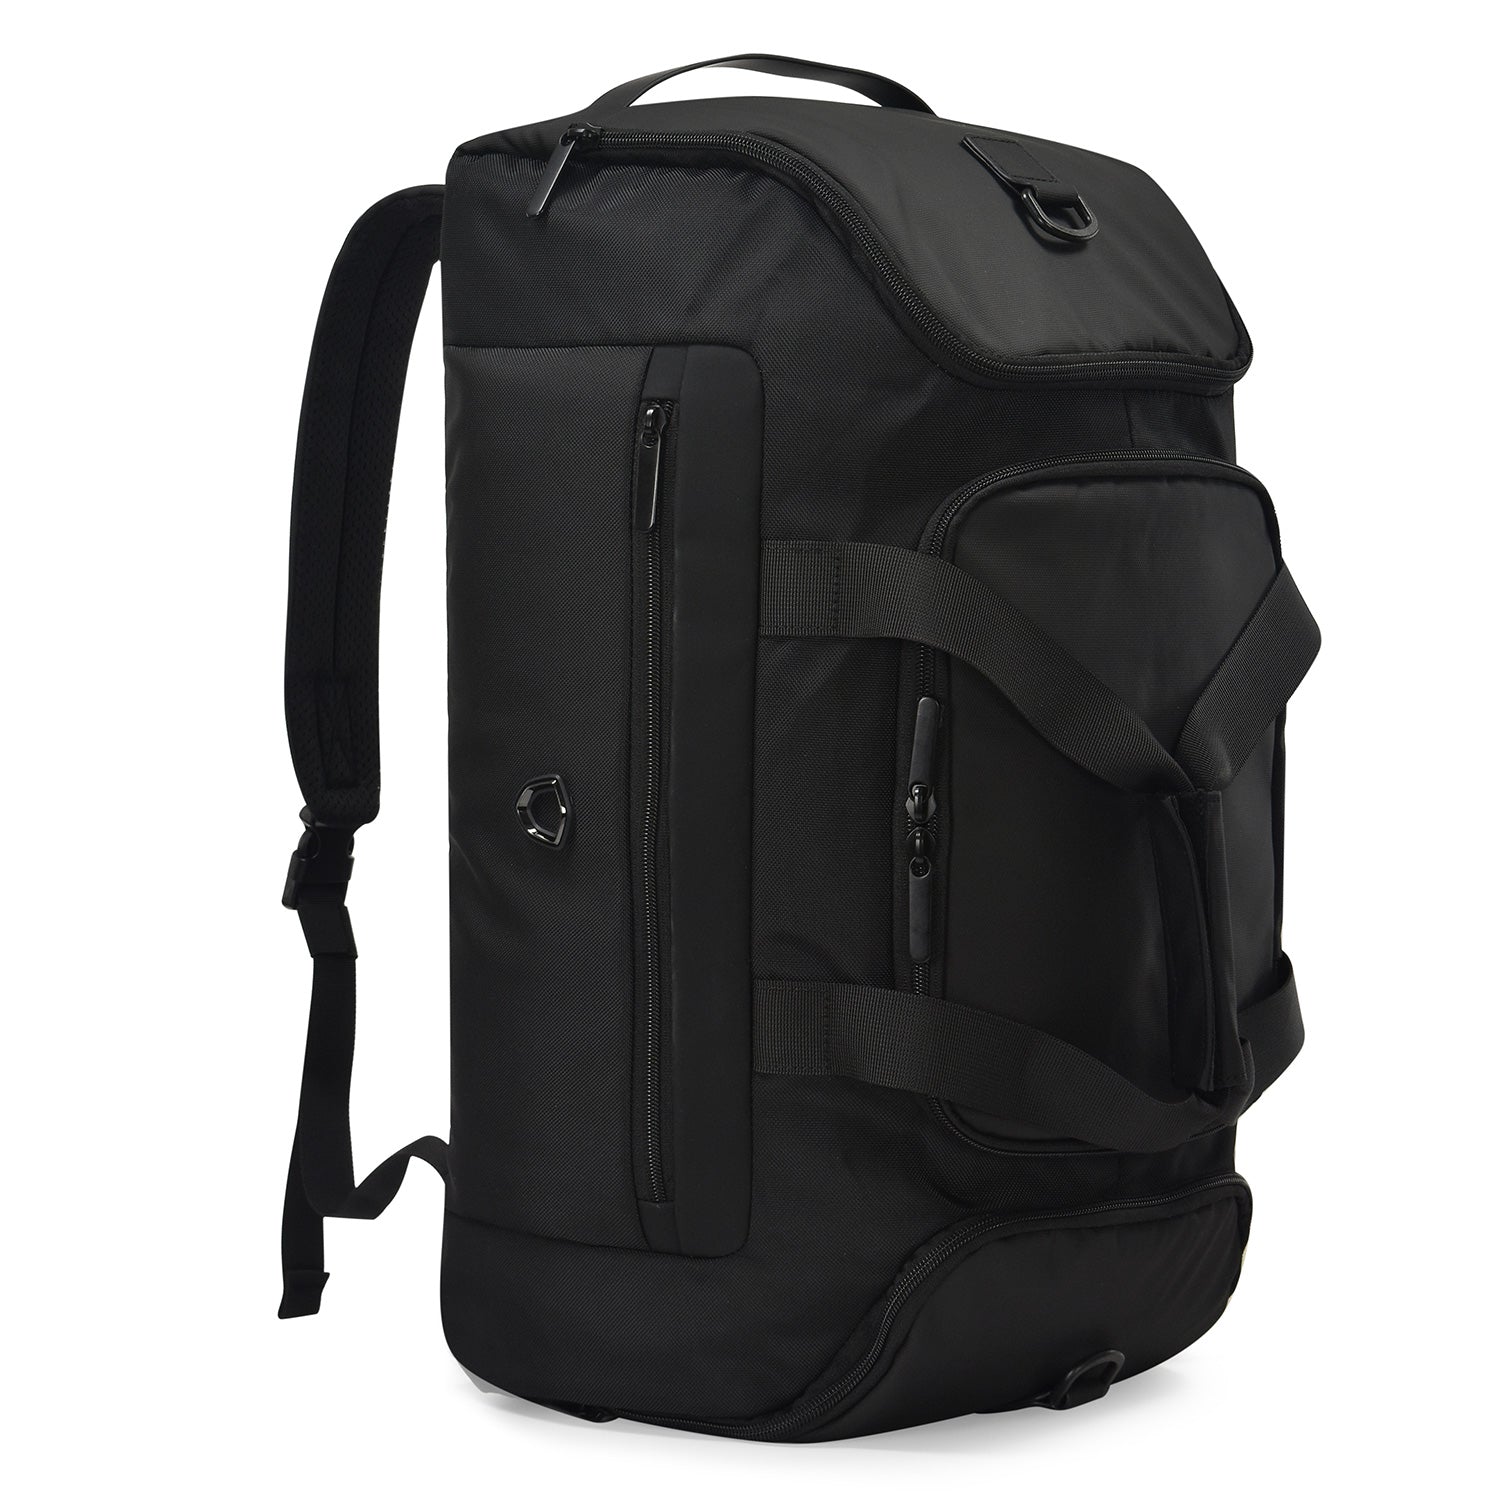 Cannonville Duffel Backpack